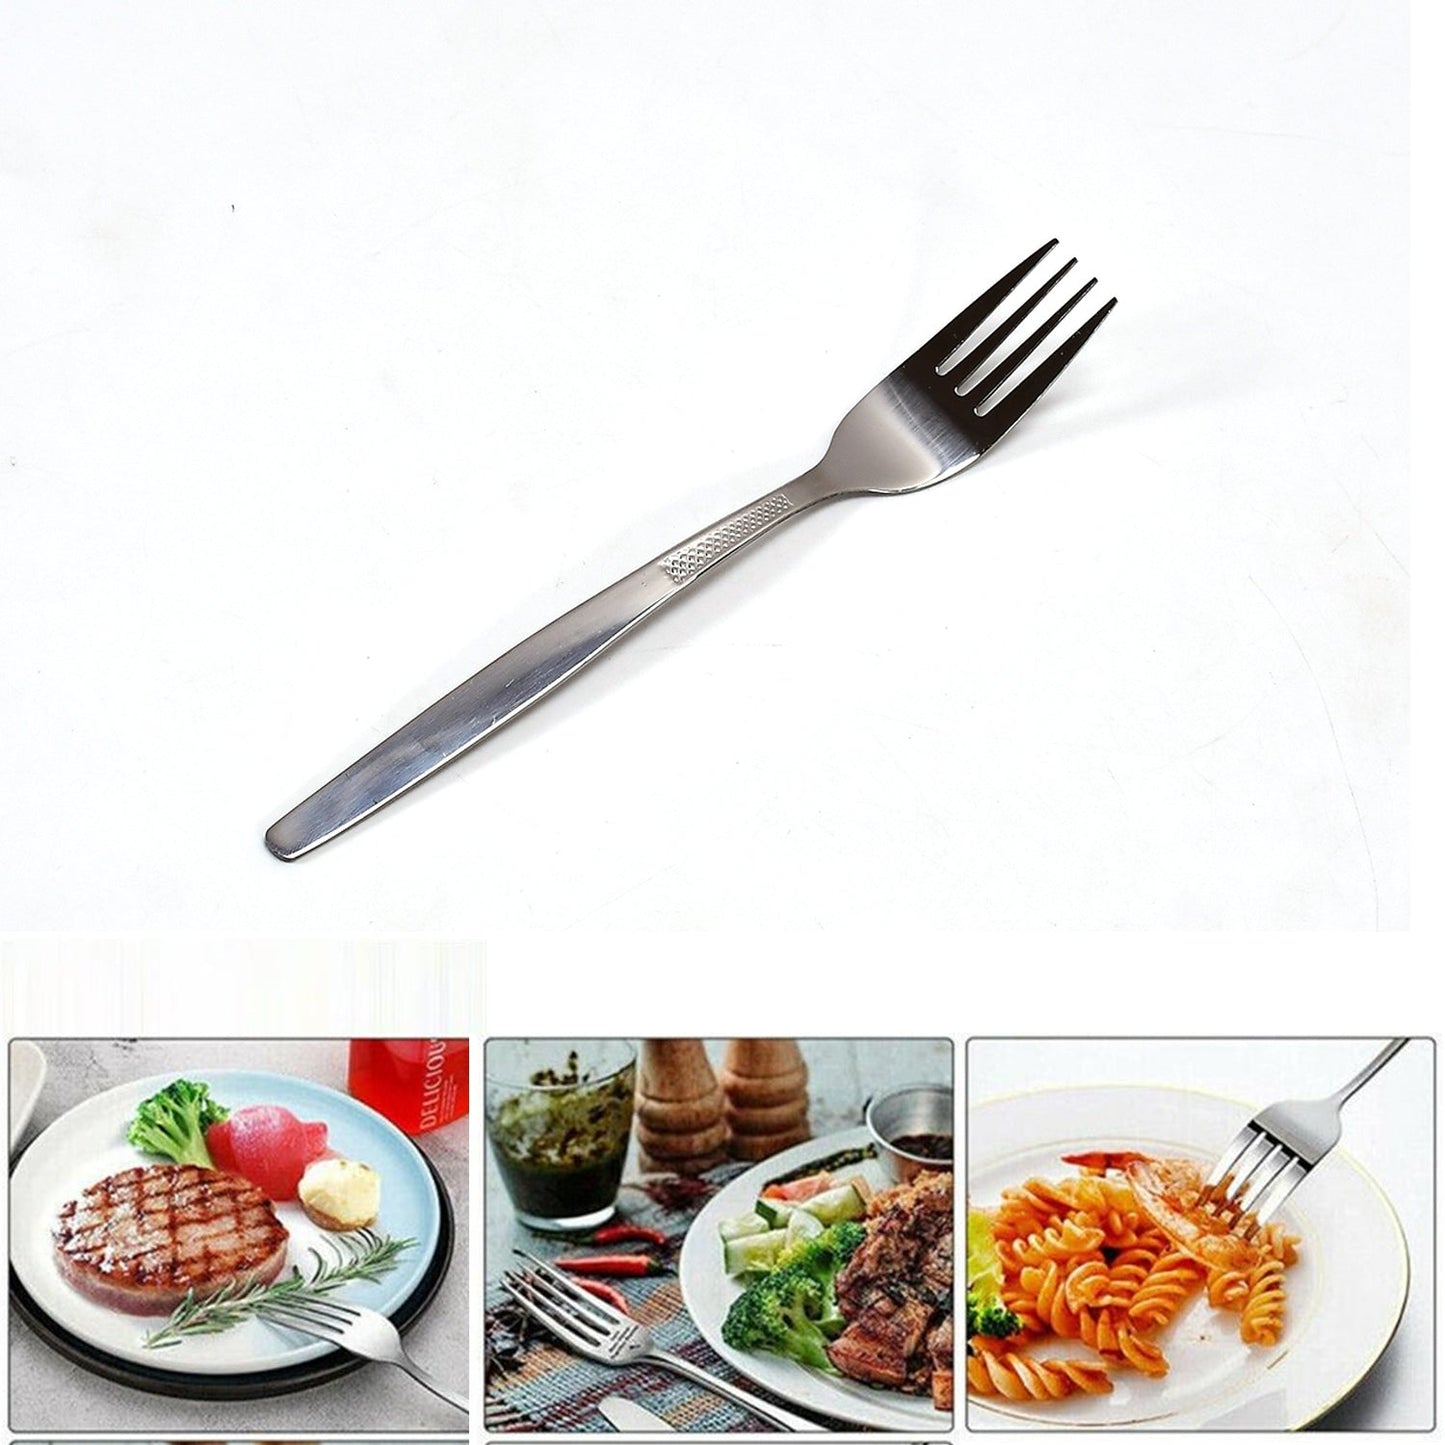 2912 Cutlery Table Forks for kitchen | Stainless Steel Forks, Dinner Forks, Genware Forks, Millennium Cutlery DukanDaily